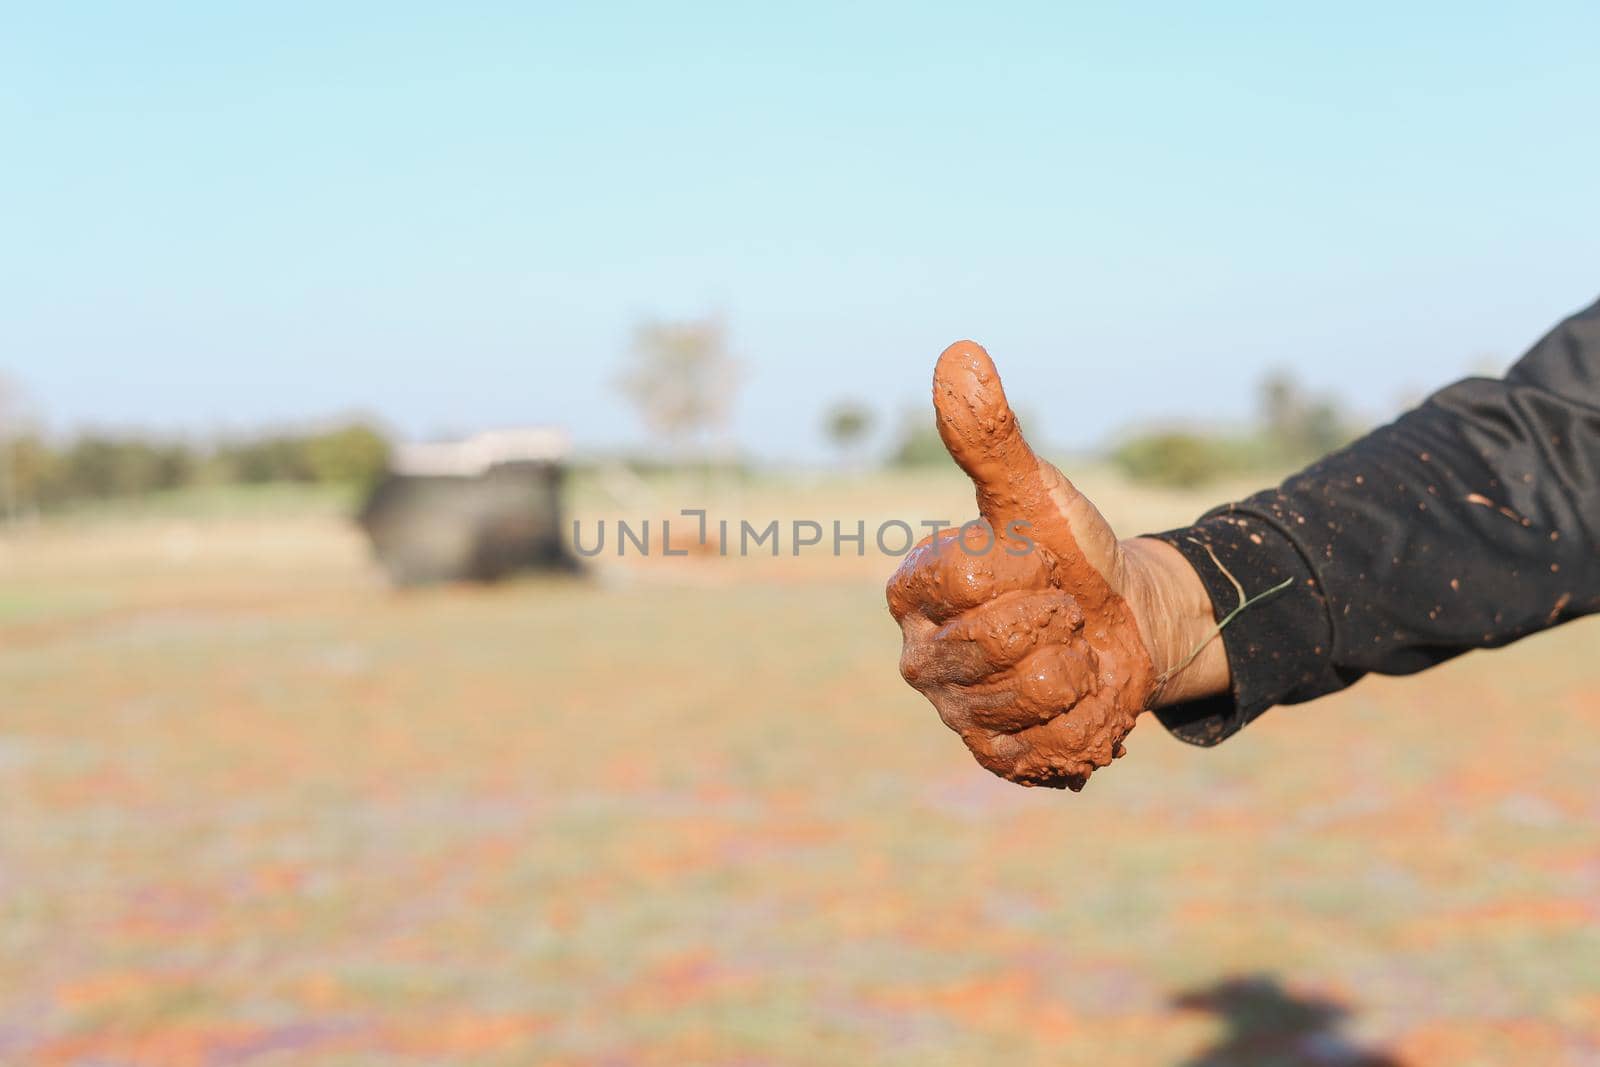 Farmers thumbs up in the field background